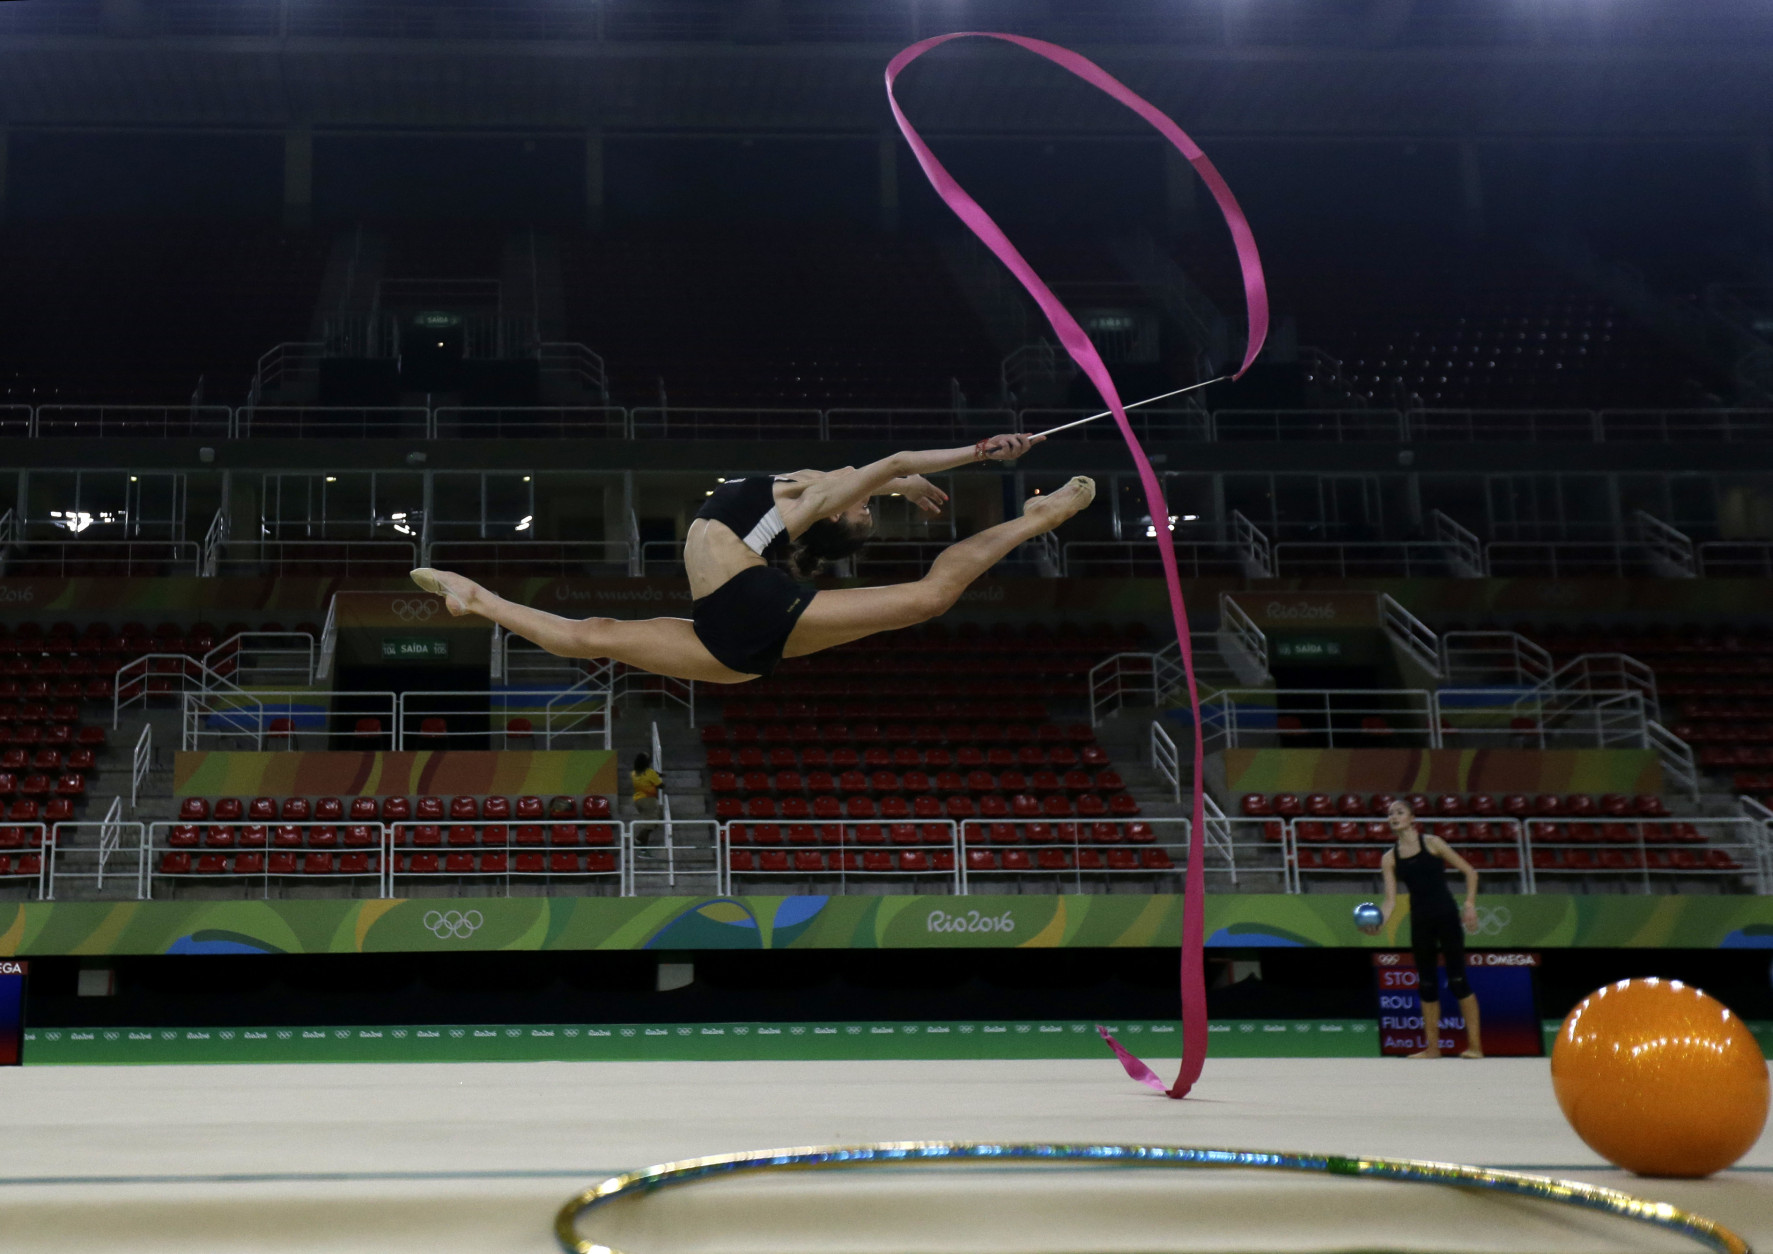 Bulgaria's Neviana Vladinova practices her routine a day ahead of the rhythmic gymnastics individual all-around qualifications at the 2016 Summer Olympics in Rio de Janeiro, Brazil, Thursday, Aug. 18, 2016. (AP Photo/Julio Cortez)